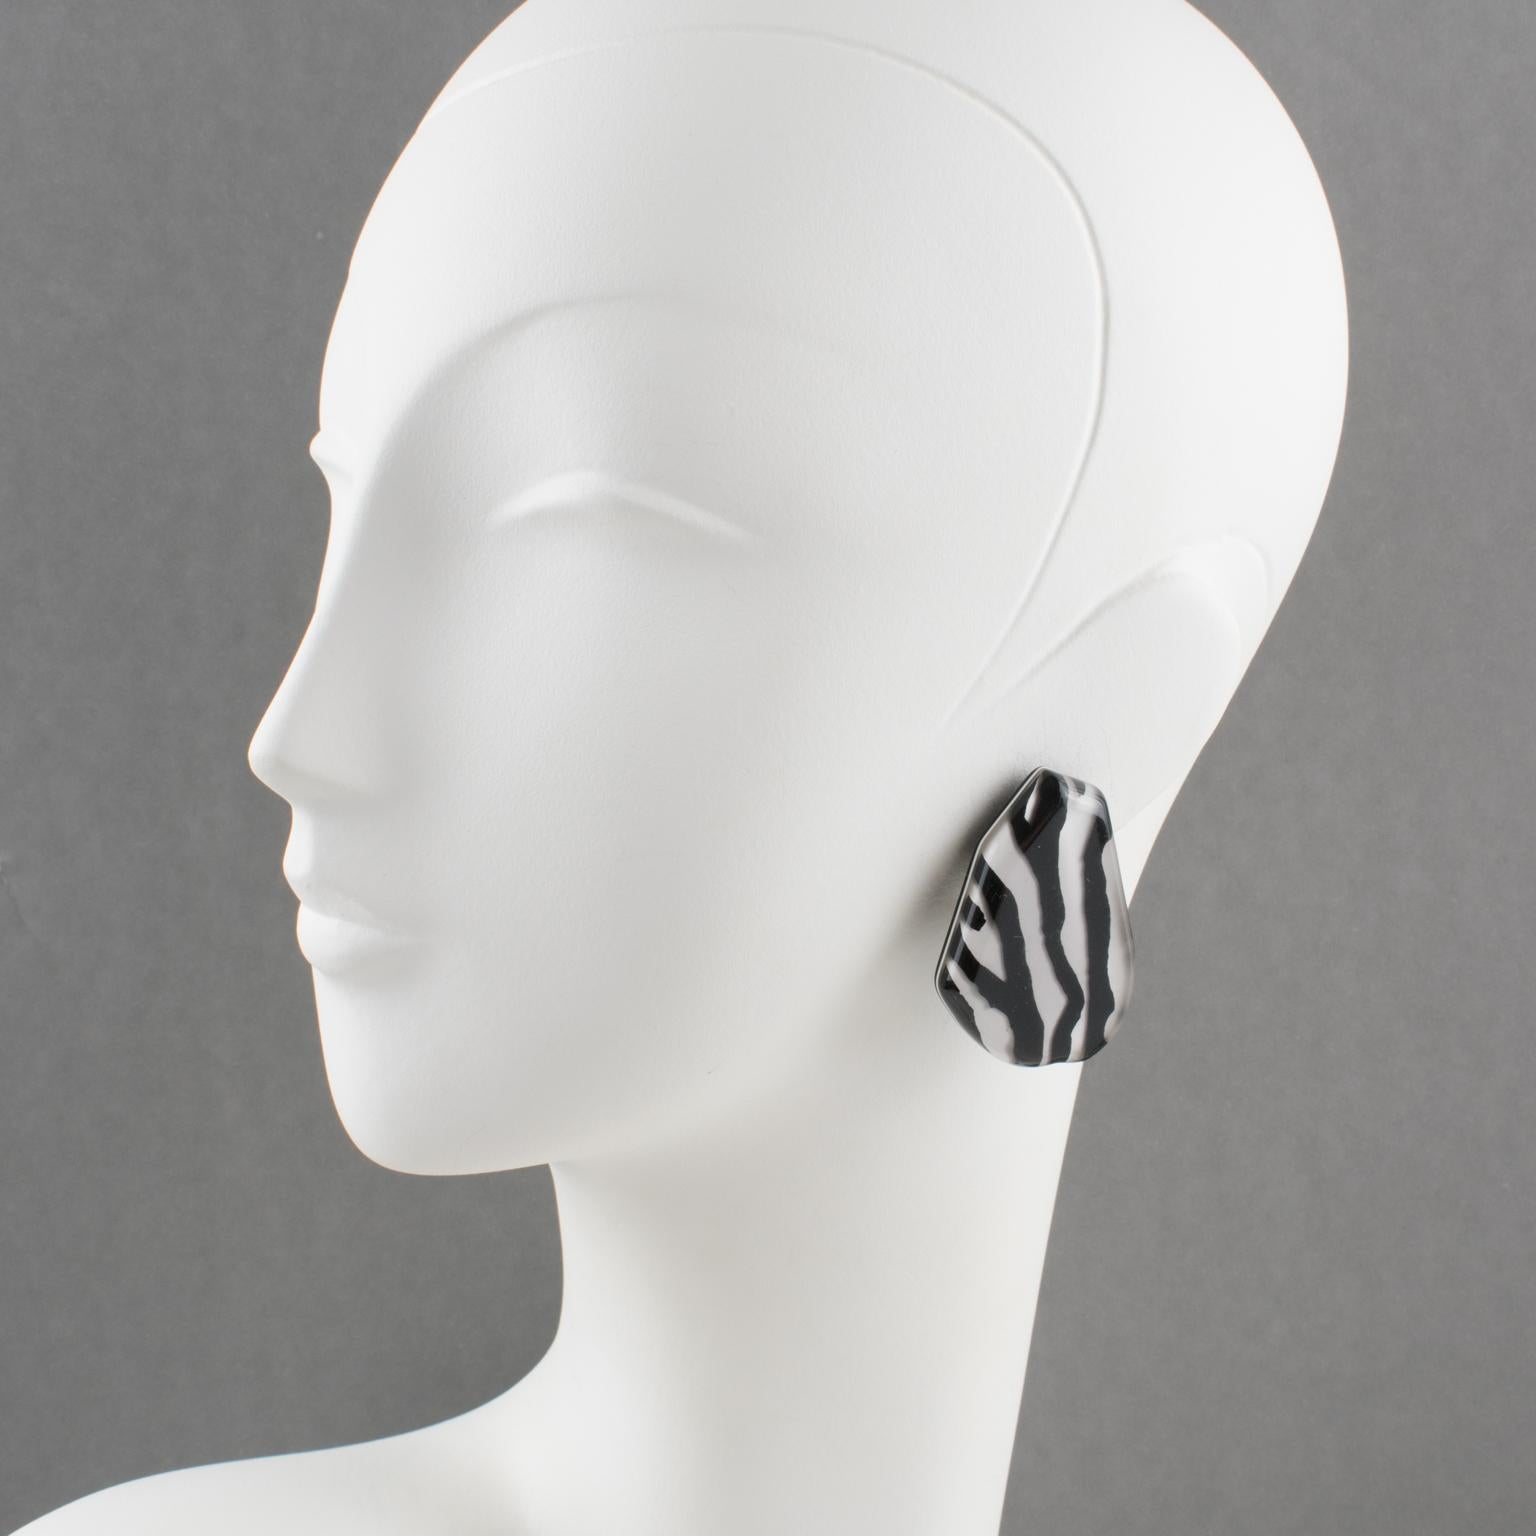 Gorgeous Lucite clip-on earrings designed by Harriet Bauknight for Kaso. Featuring a large flat free-form shape with zebra-striped pattern in black and white and beveling edges all around. 
Kaso paper sticker missing but the specific rotating clip